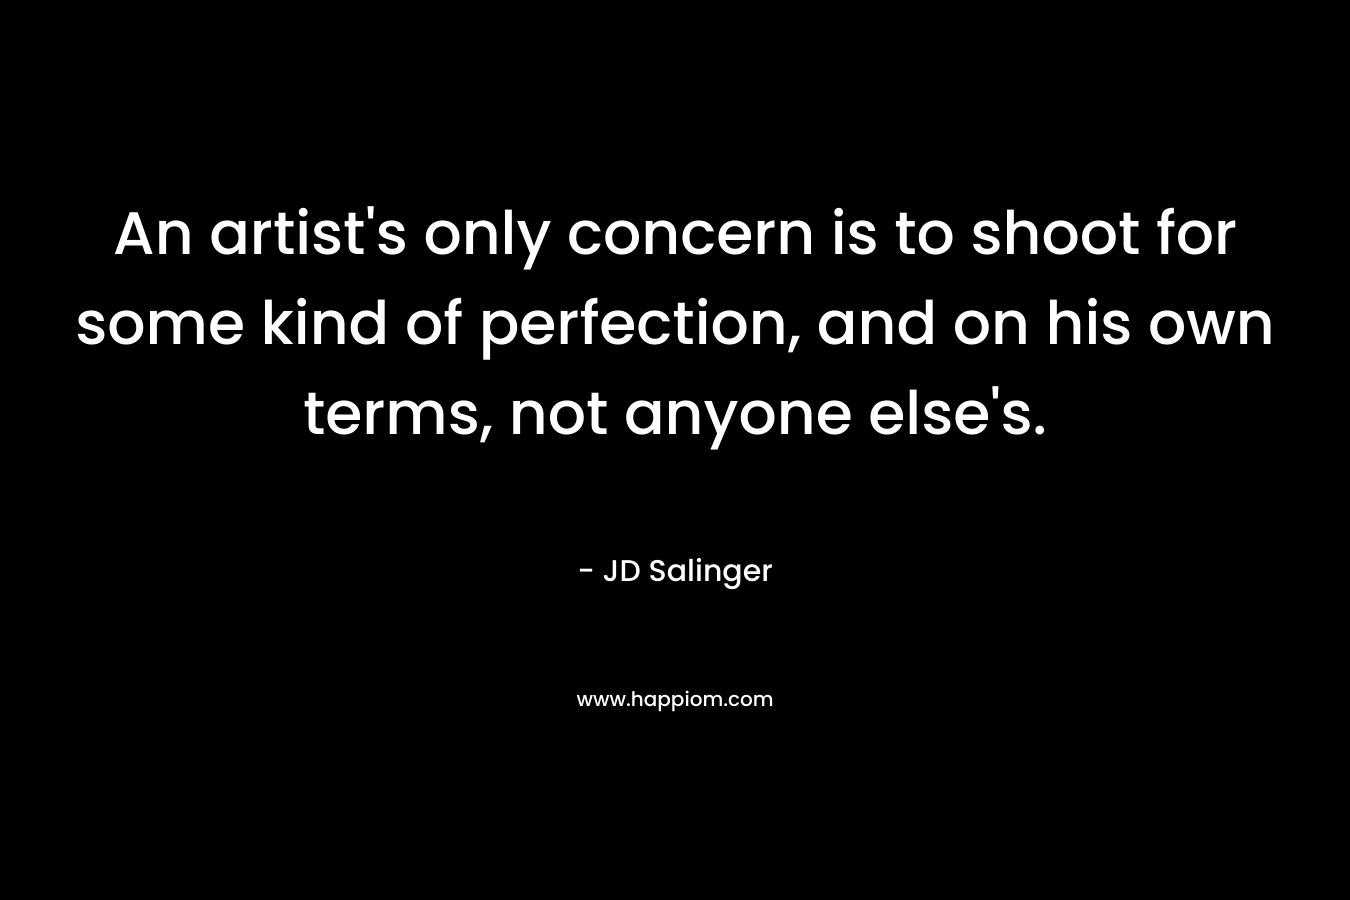 An artist's only concern is to shoot for some kind of perfection, and on his own terms, not anyone else's.